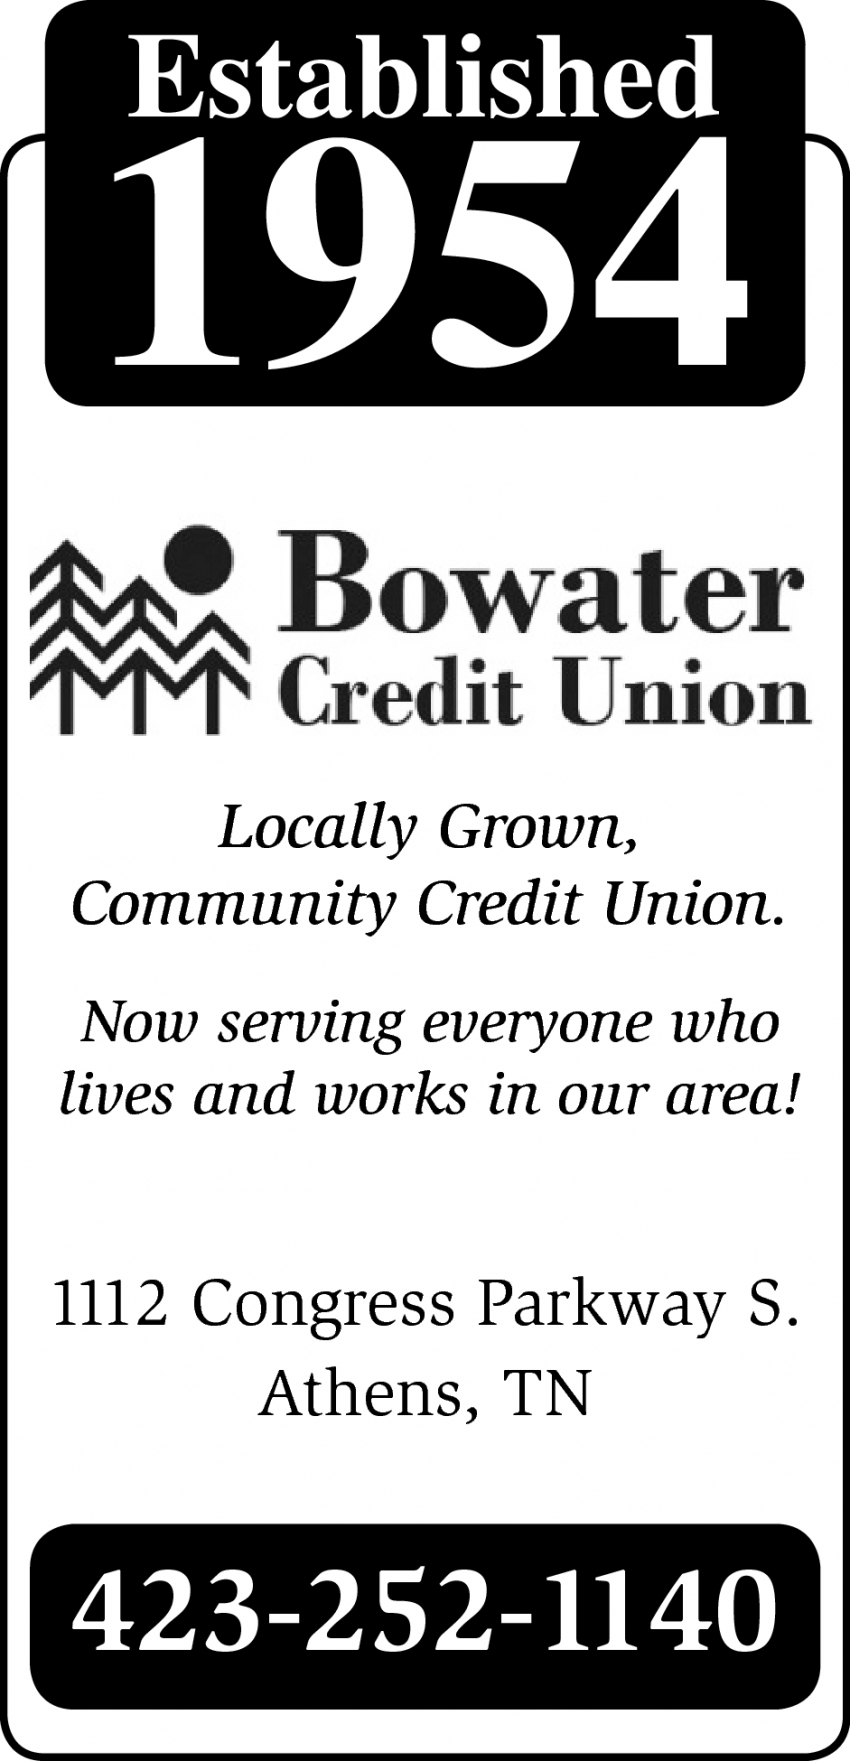 Now Serving Everyone Who Lives and Works In Our Area!